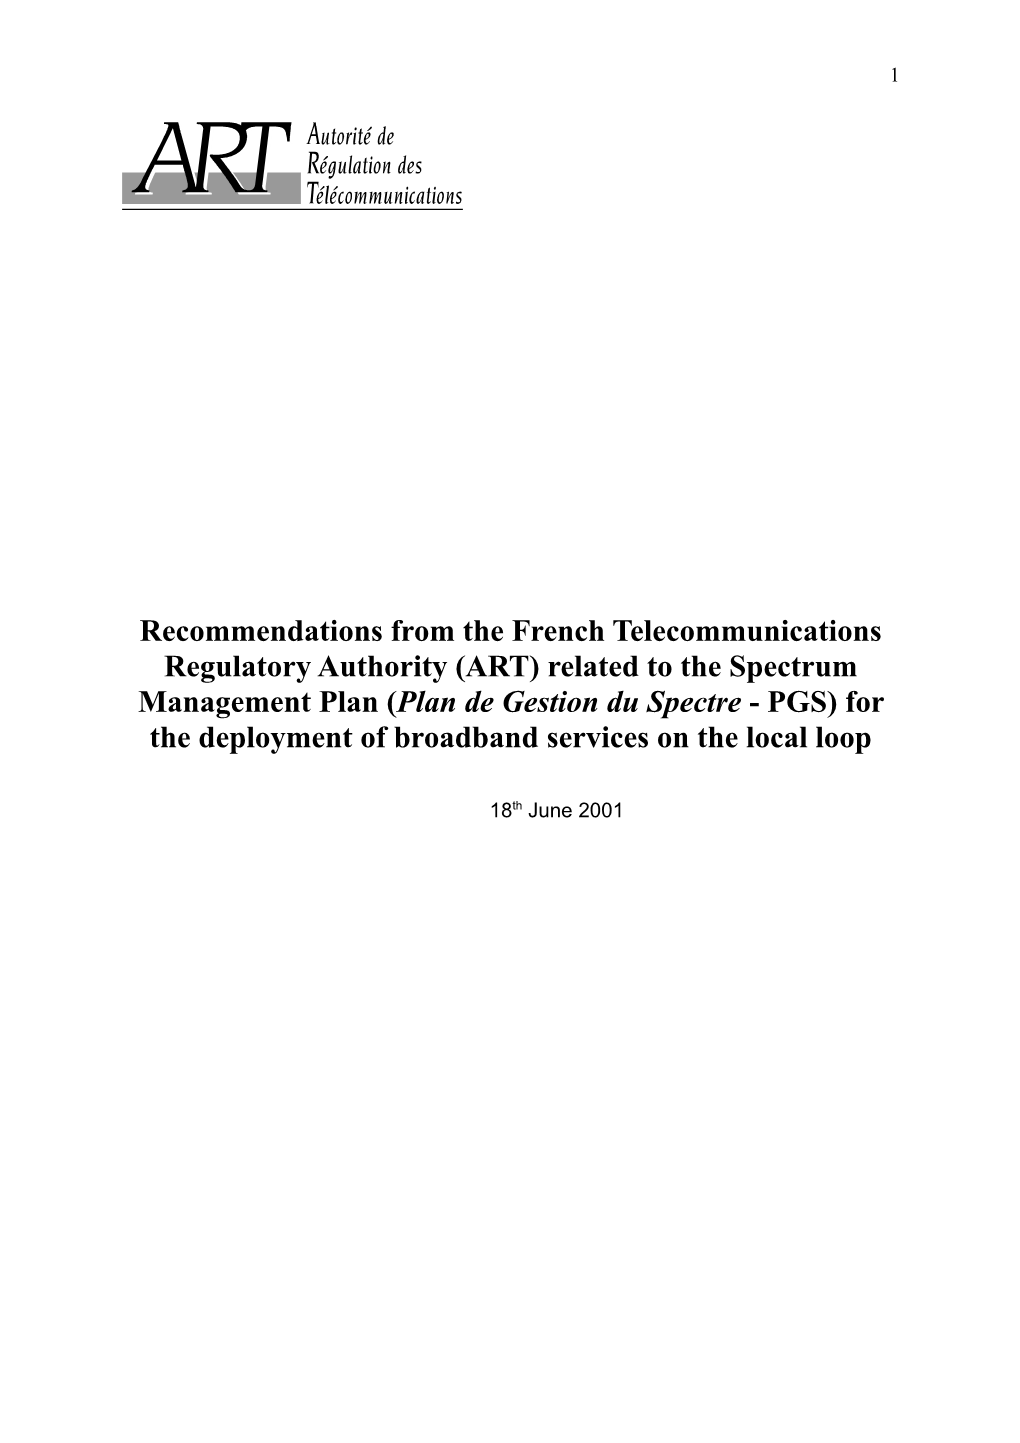 Recommendations from the French Telecommunications Regulatory Authority (ART) Related